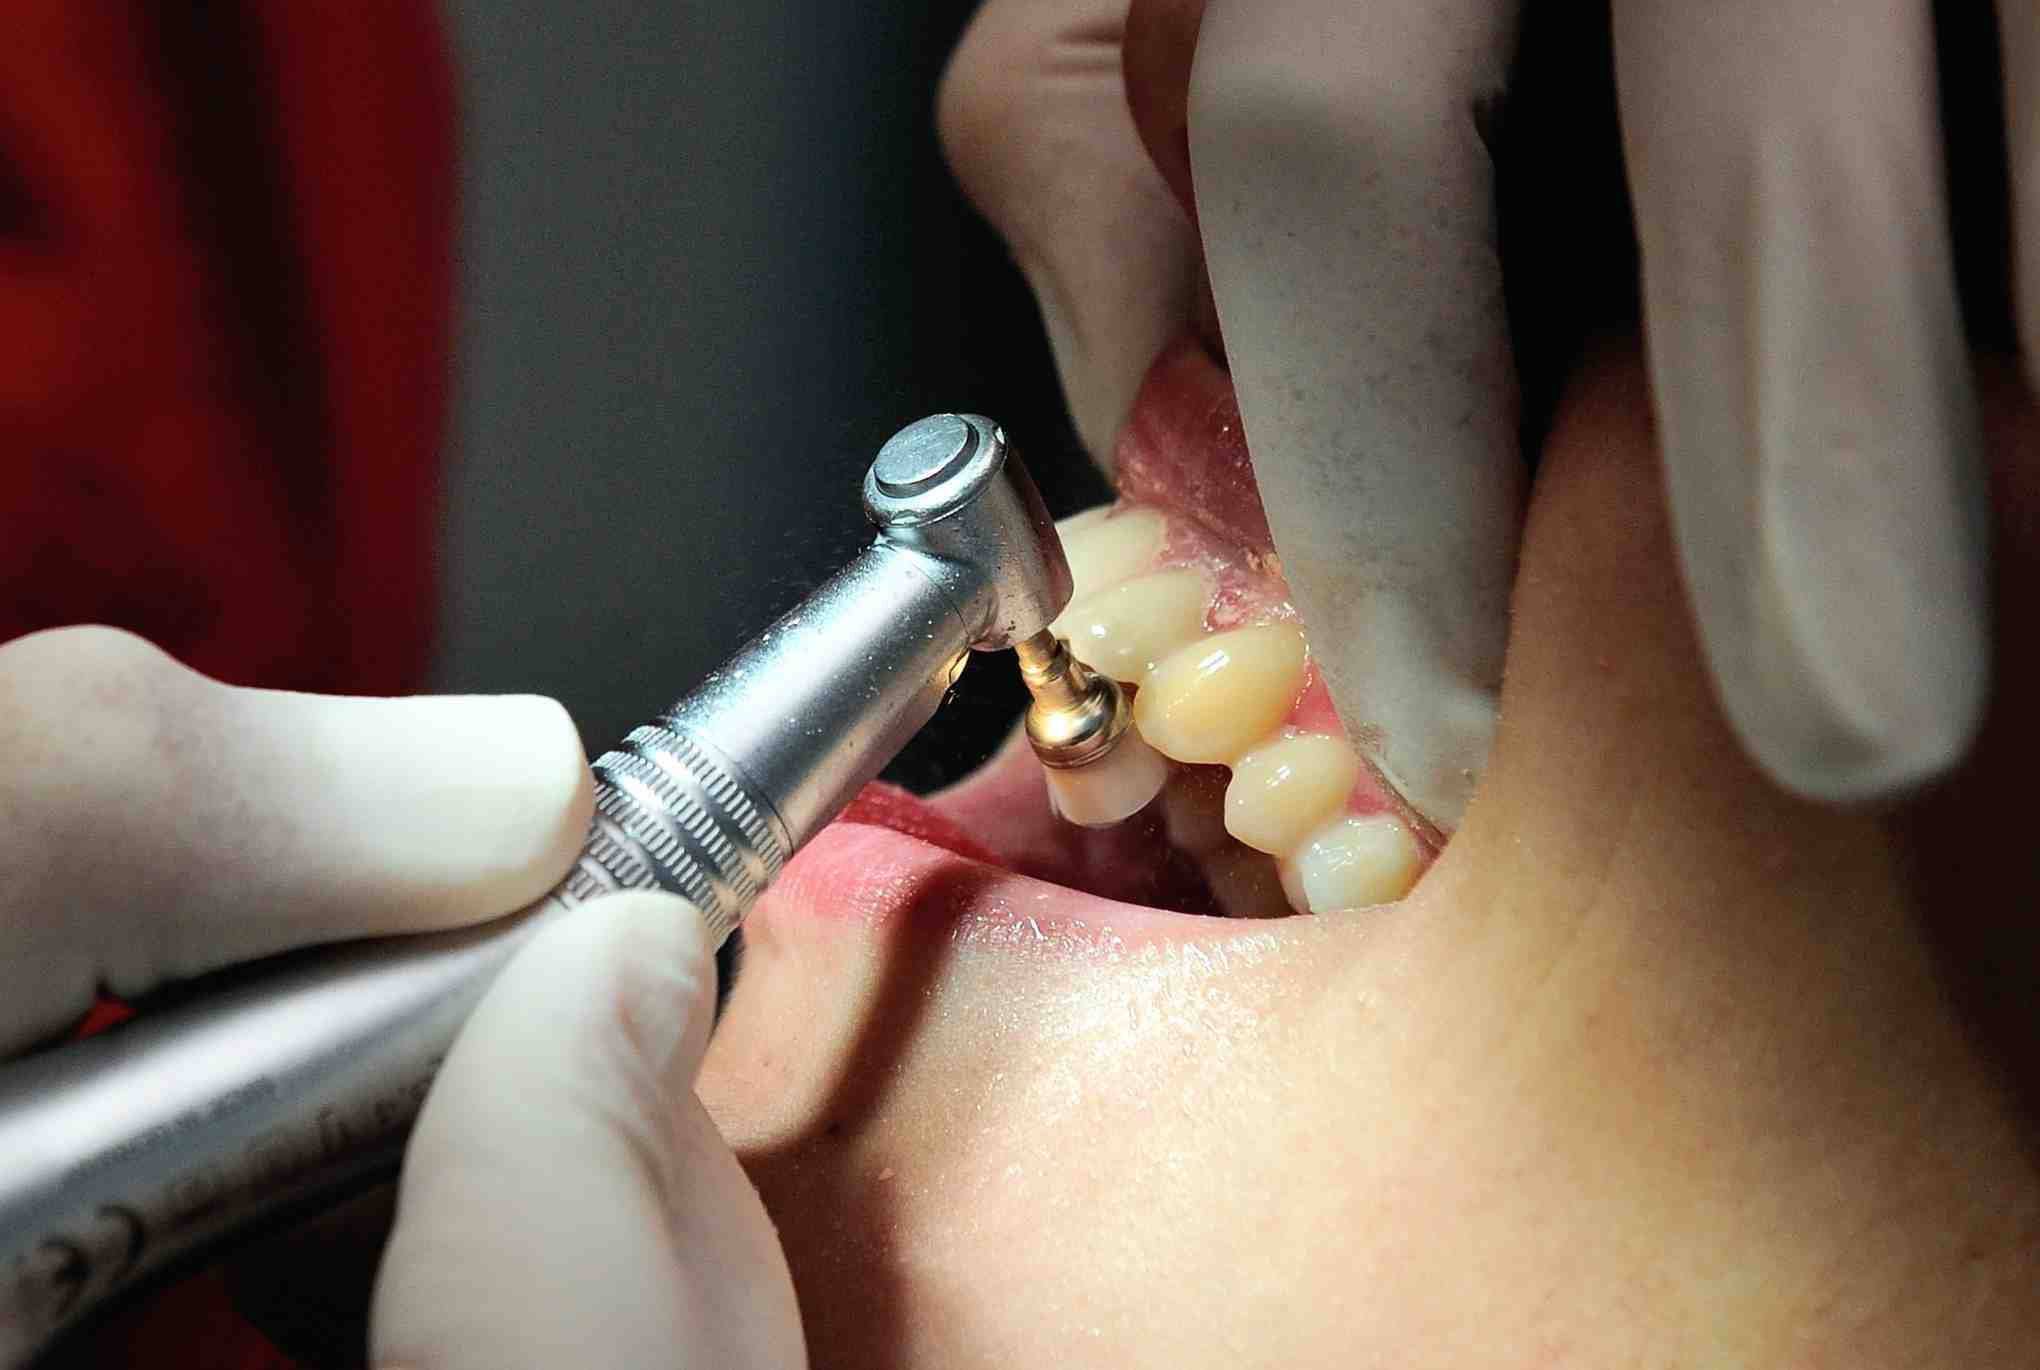 What to do if you can't afford to go to the dentist?